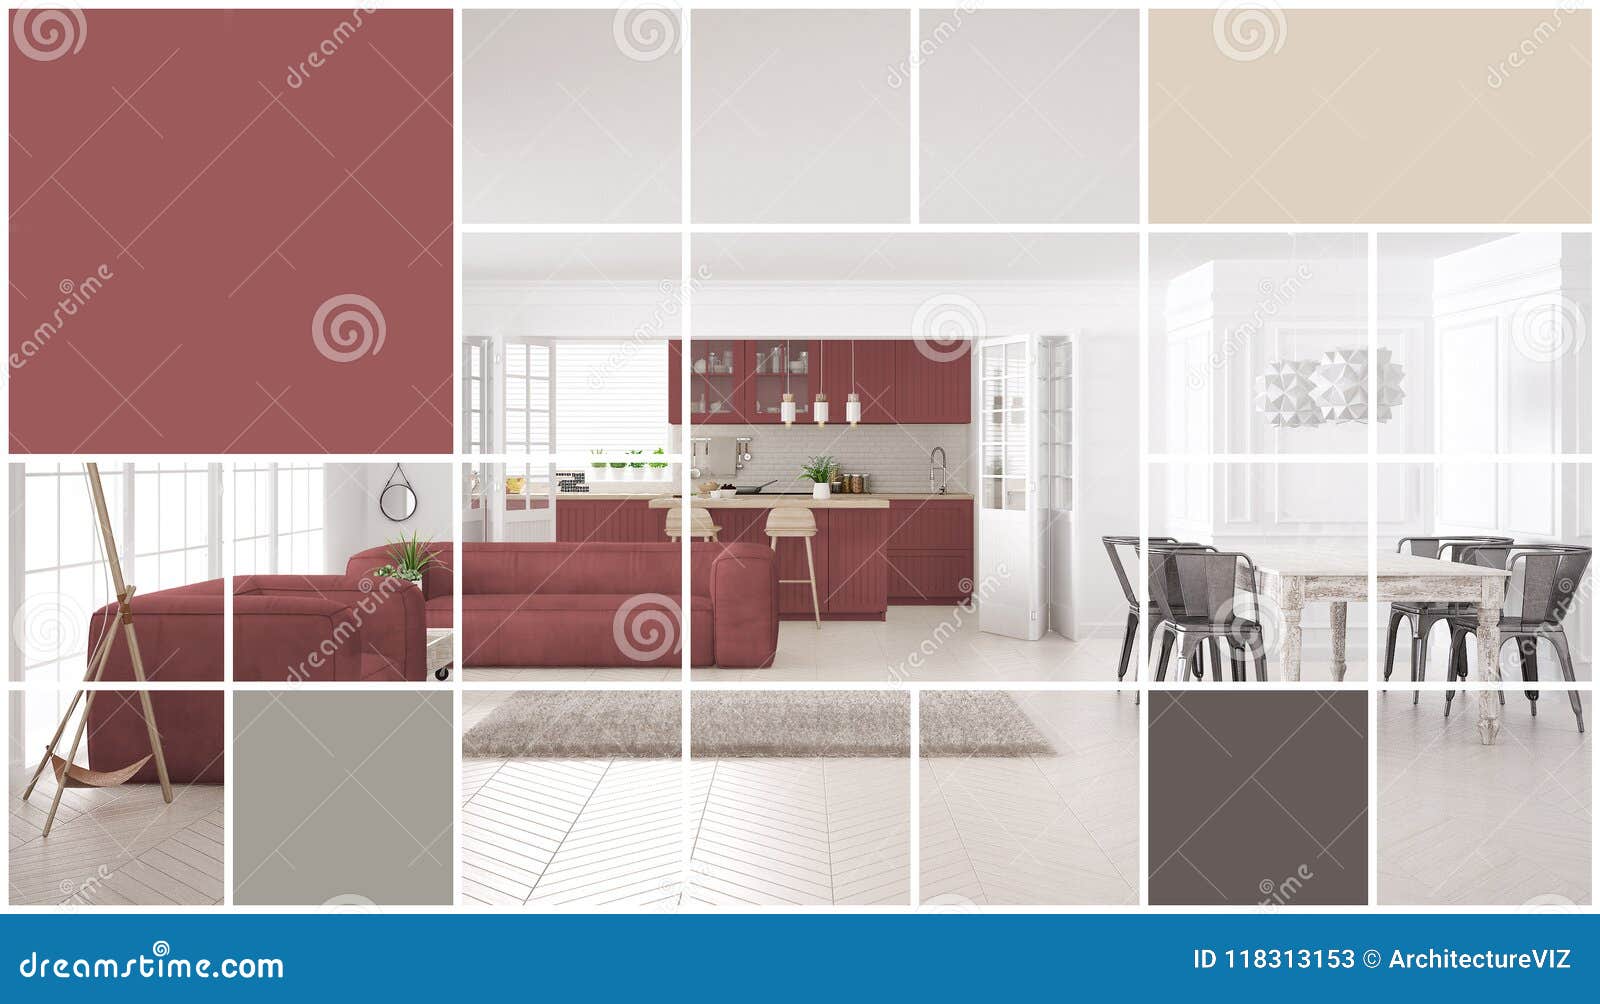 Geometric Square Mosaic Graphic Effect With Copy Space For